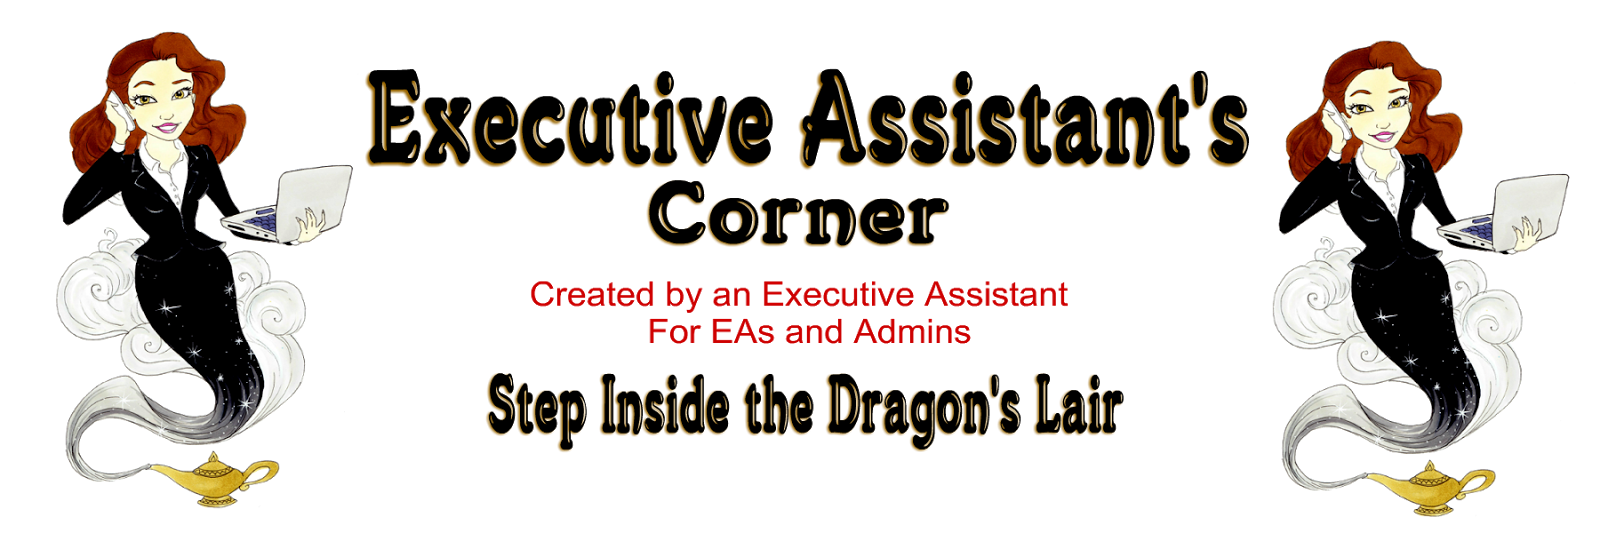 executive-assistant-s-corner-paying-tribute-to-executive-assistants-and-admin-professionals